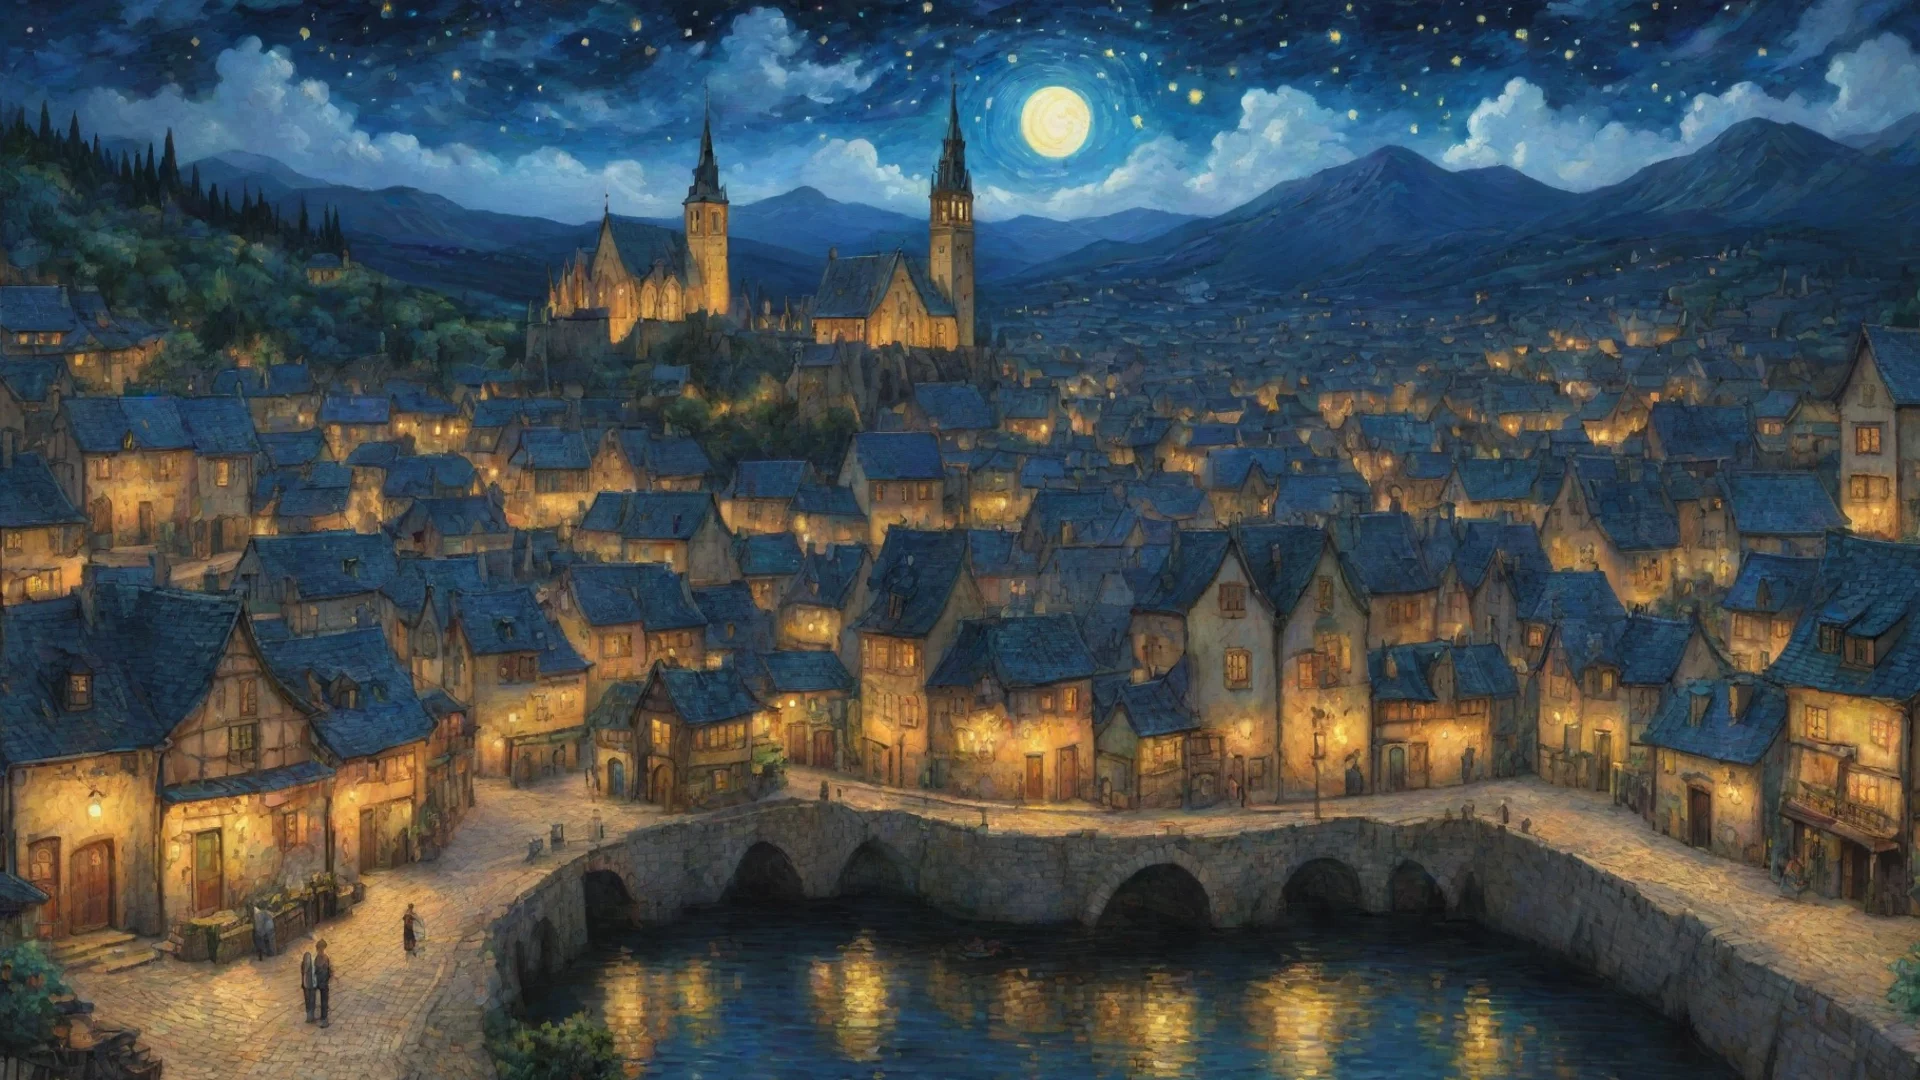 aitrending epic town lit up at night sky epic lovely artistic ghibli van gogh happyness bliss peace  detailed asthetic hd wow good looking fantastic 1 wide